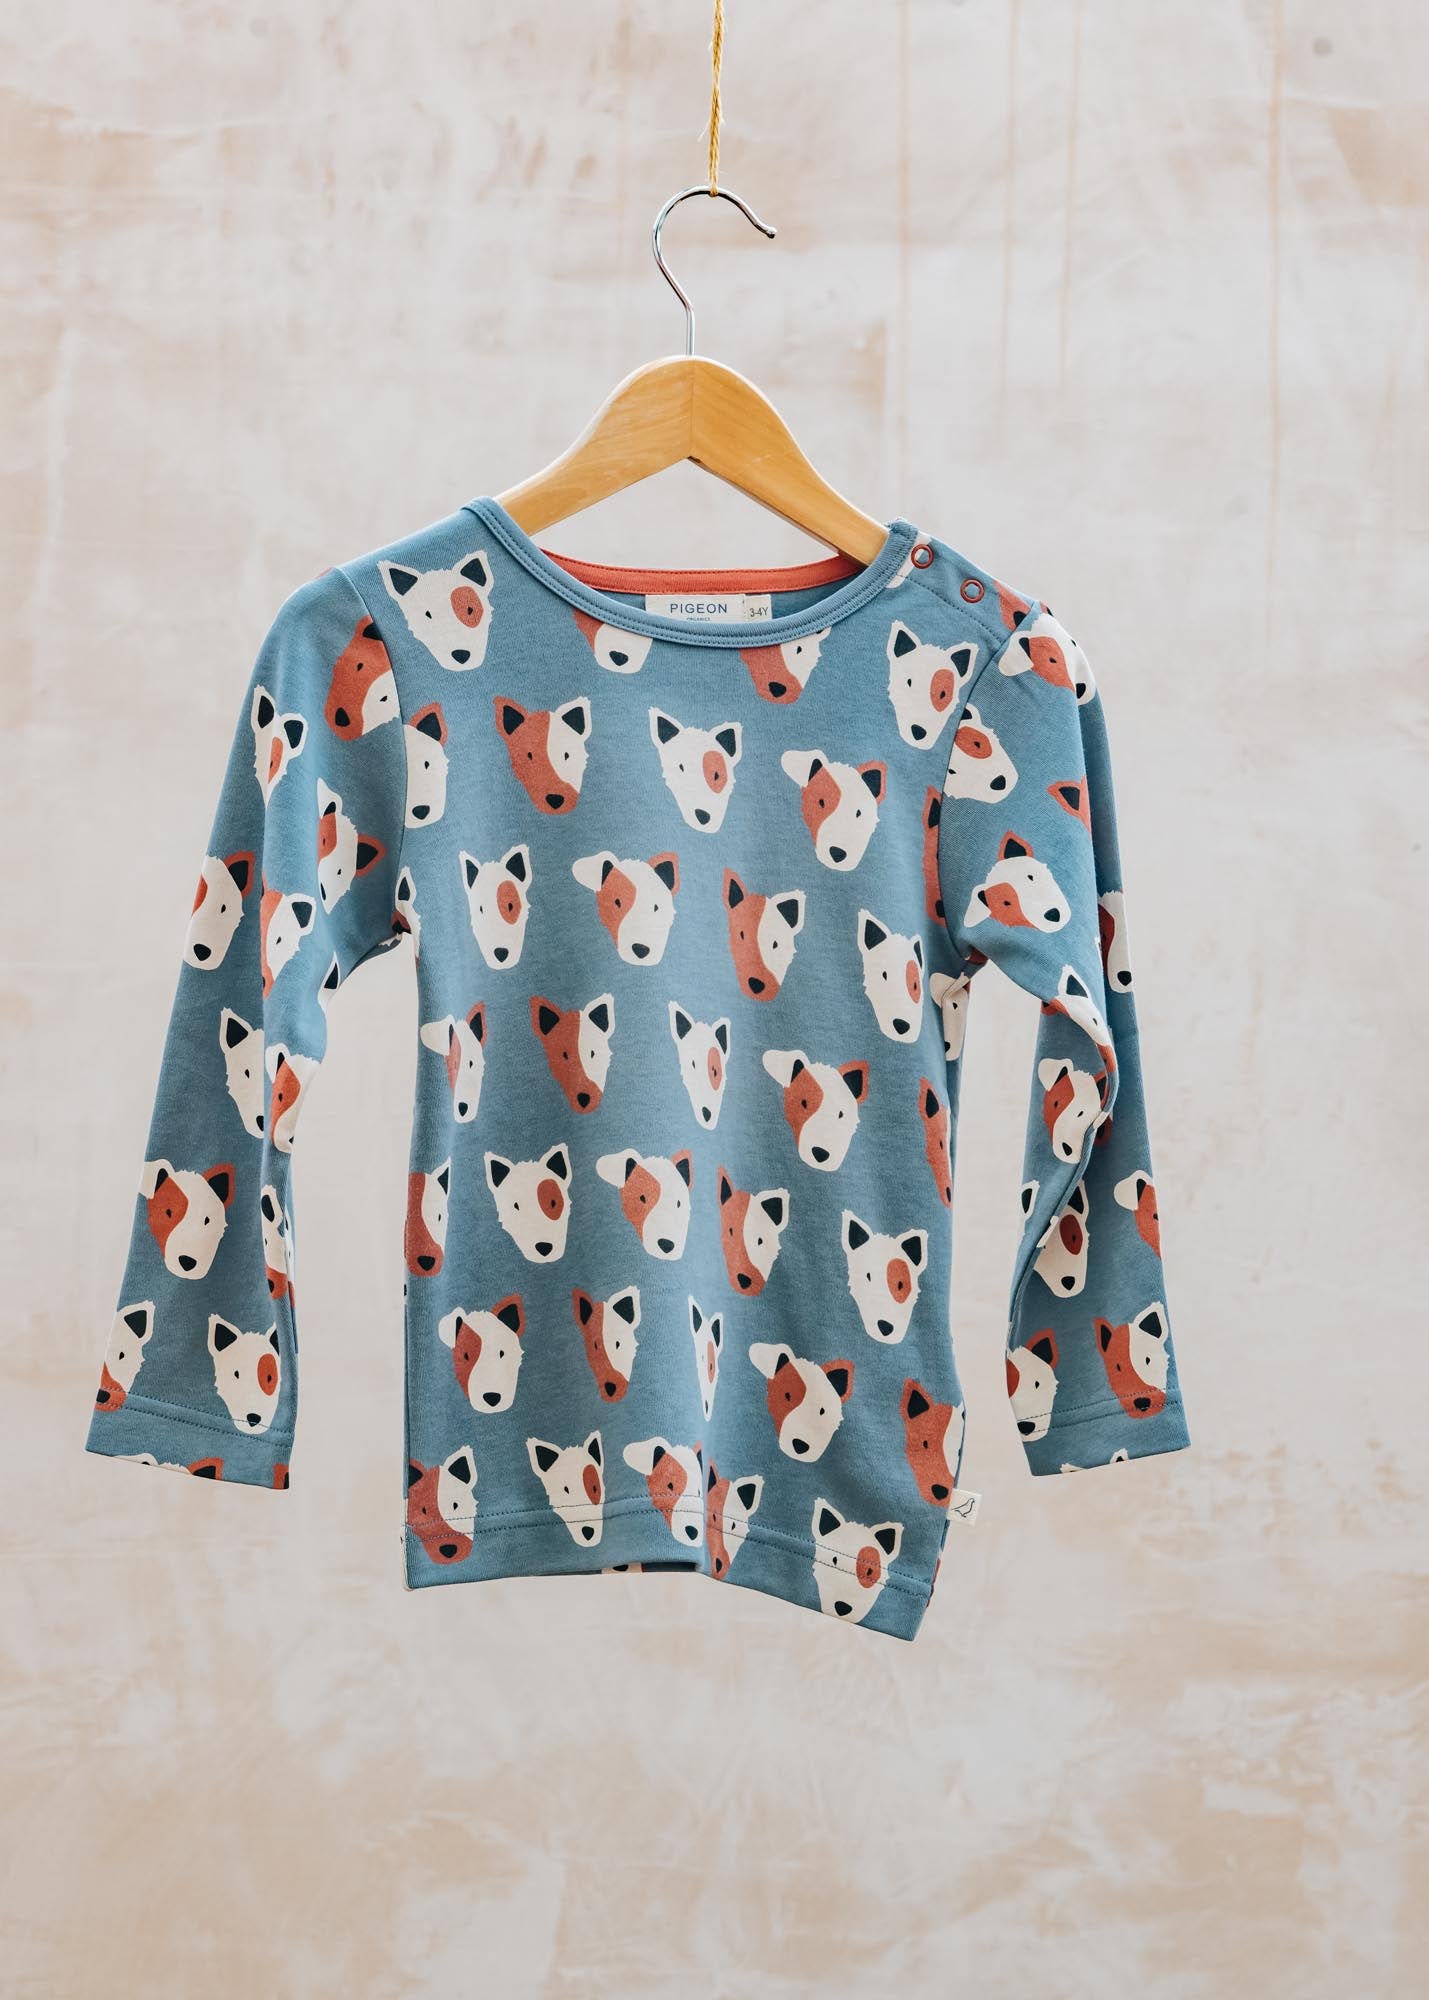 Pigeon Organics Children's Long Sleeved T-Shirt in Blue with Dogs